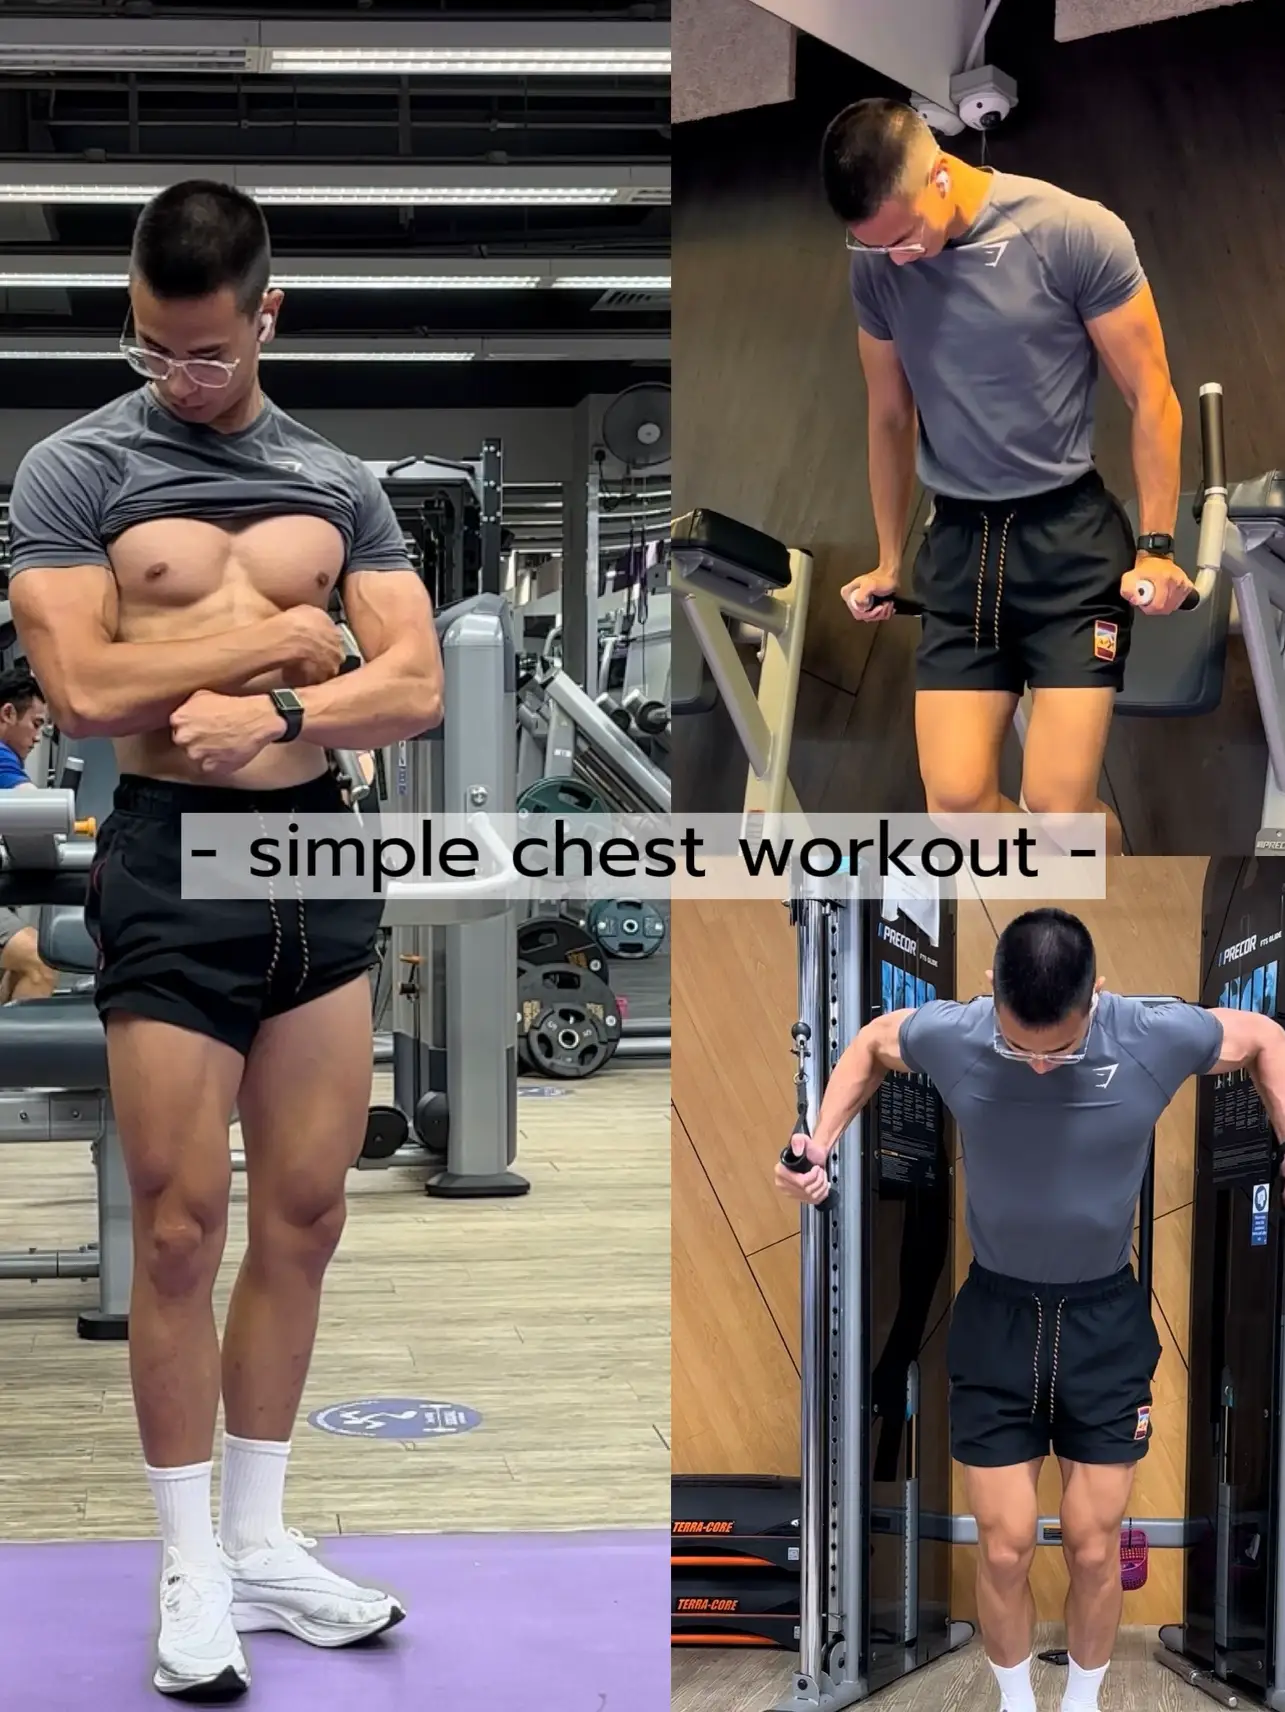 Full CHETS WORKOUT 💪  Chest workout, Gym workout chart, Gym